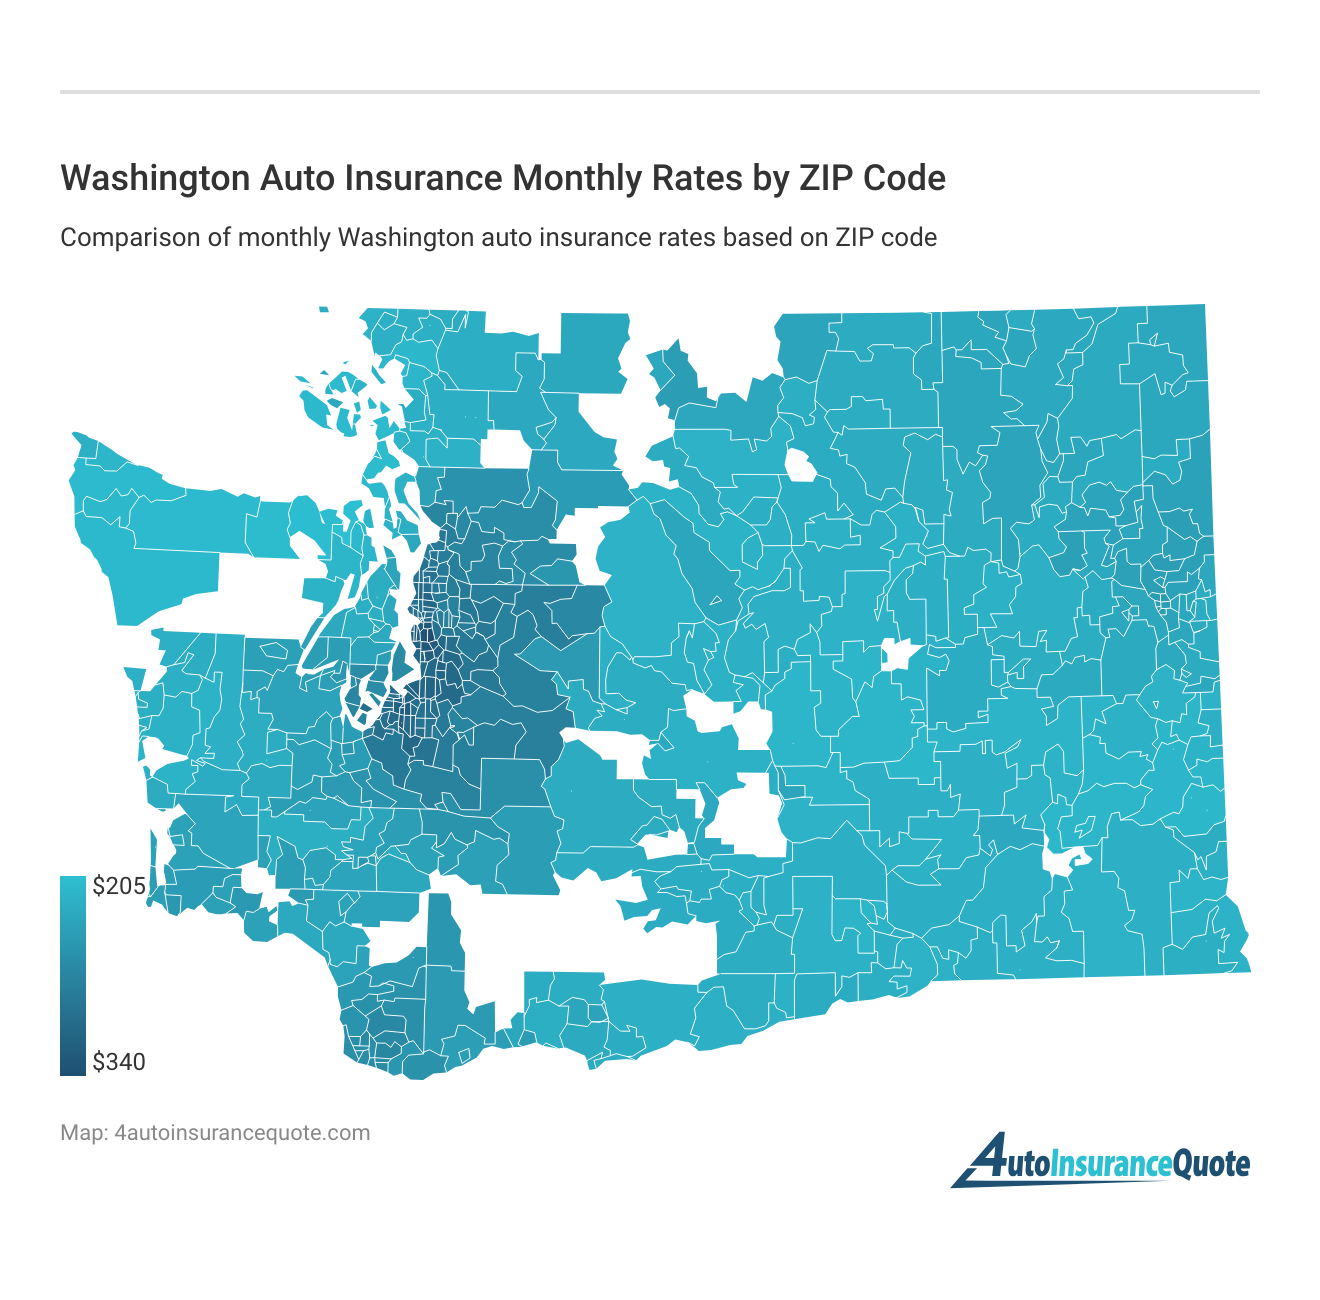 <h3>Washington Auto Insurance Monthly Rates by ZIP Code</h3>